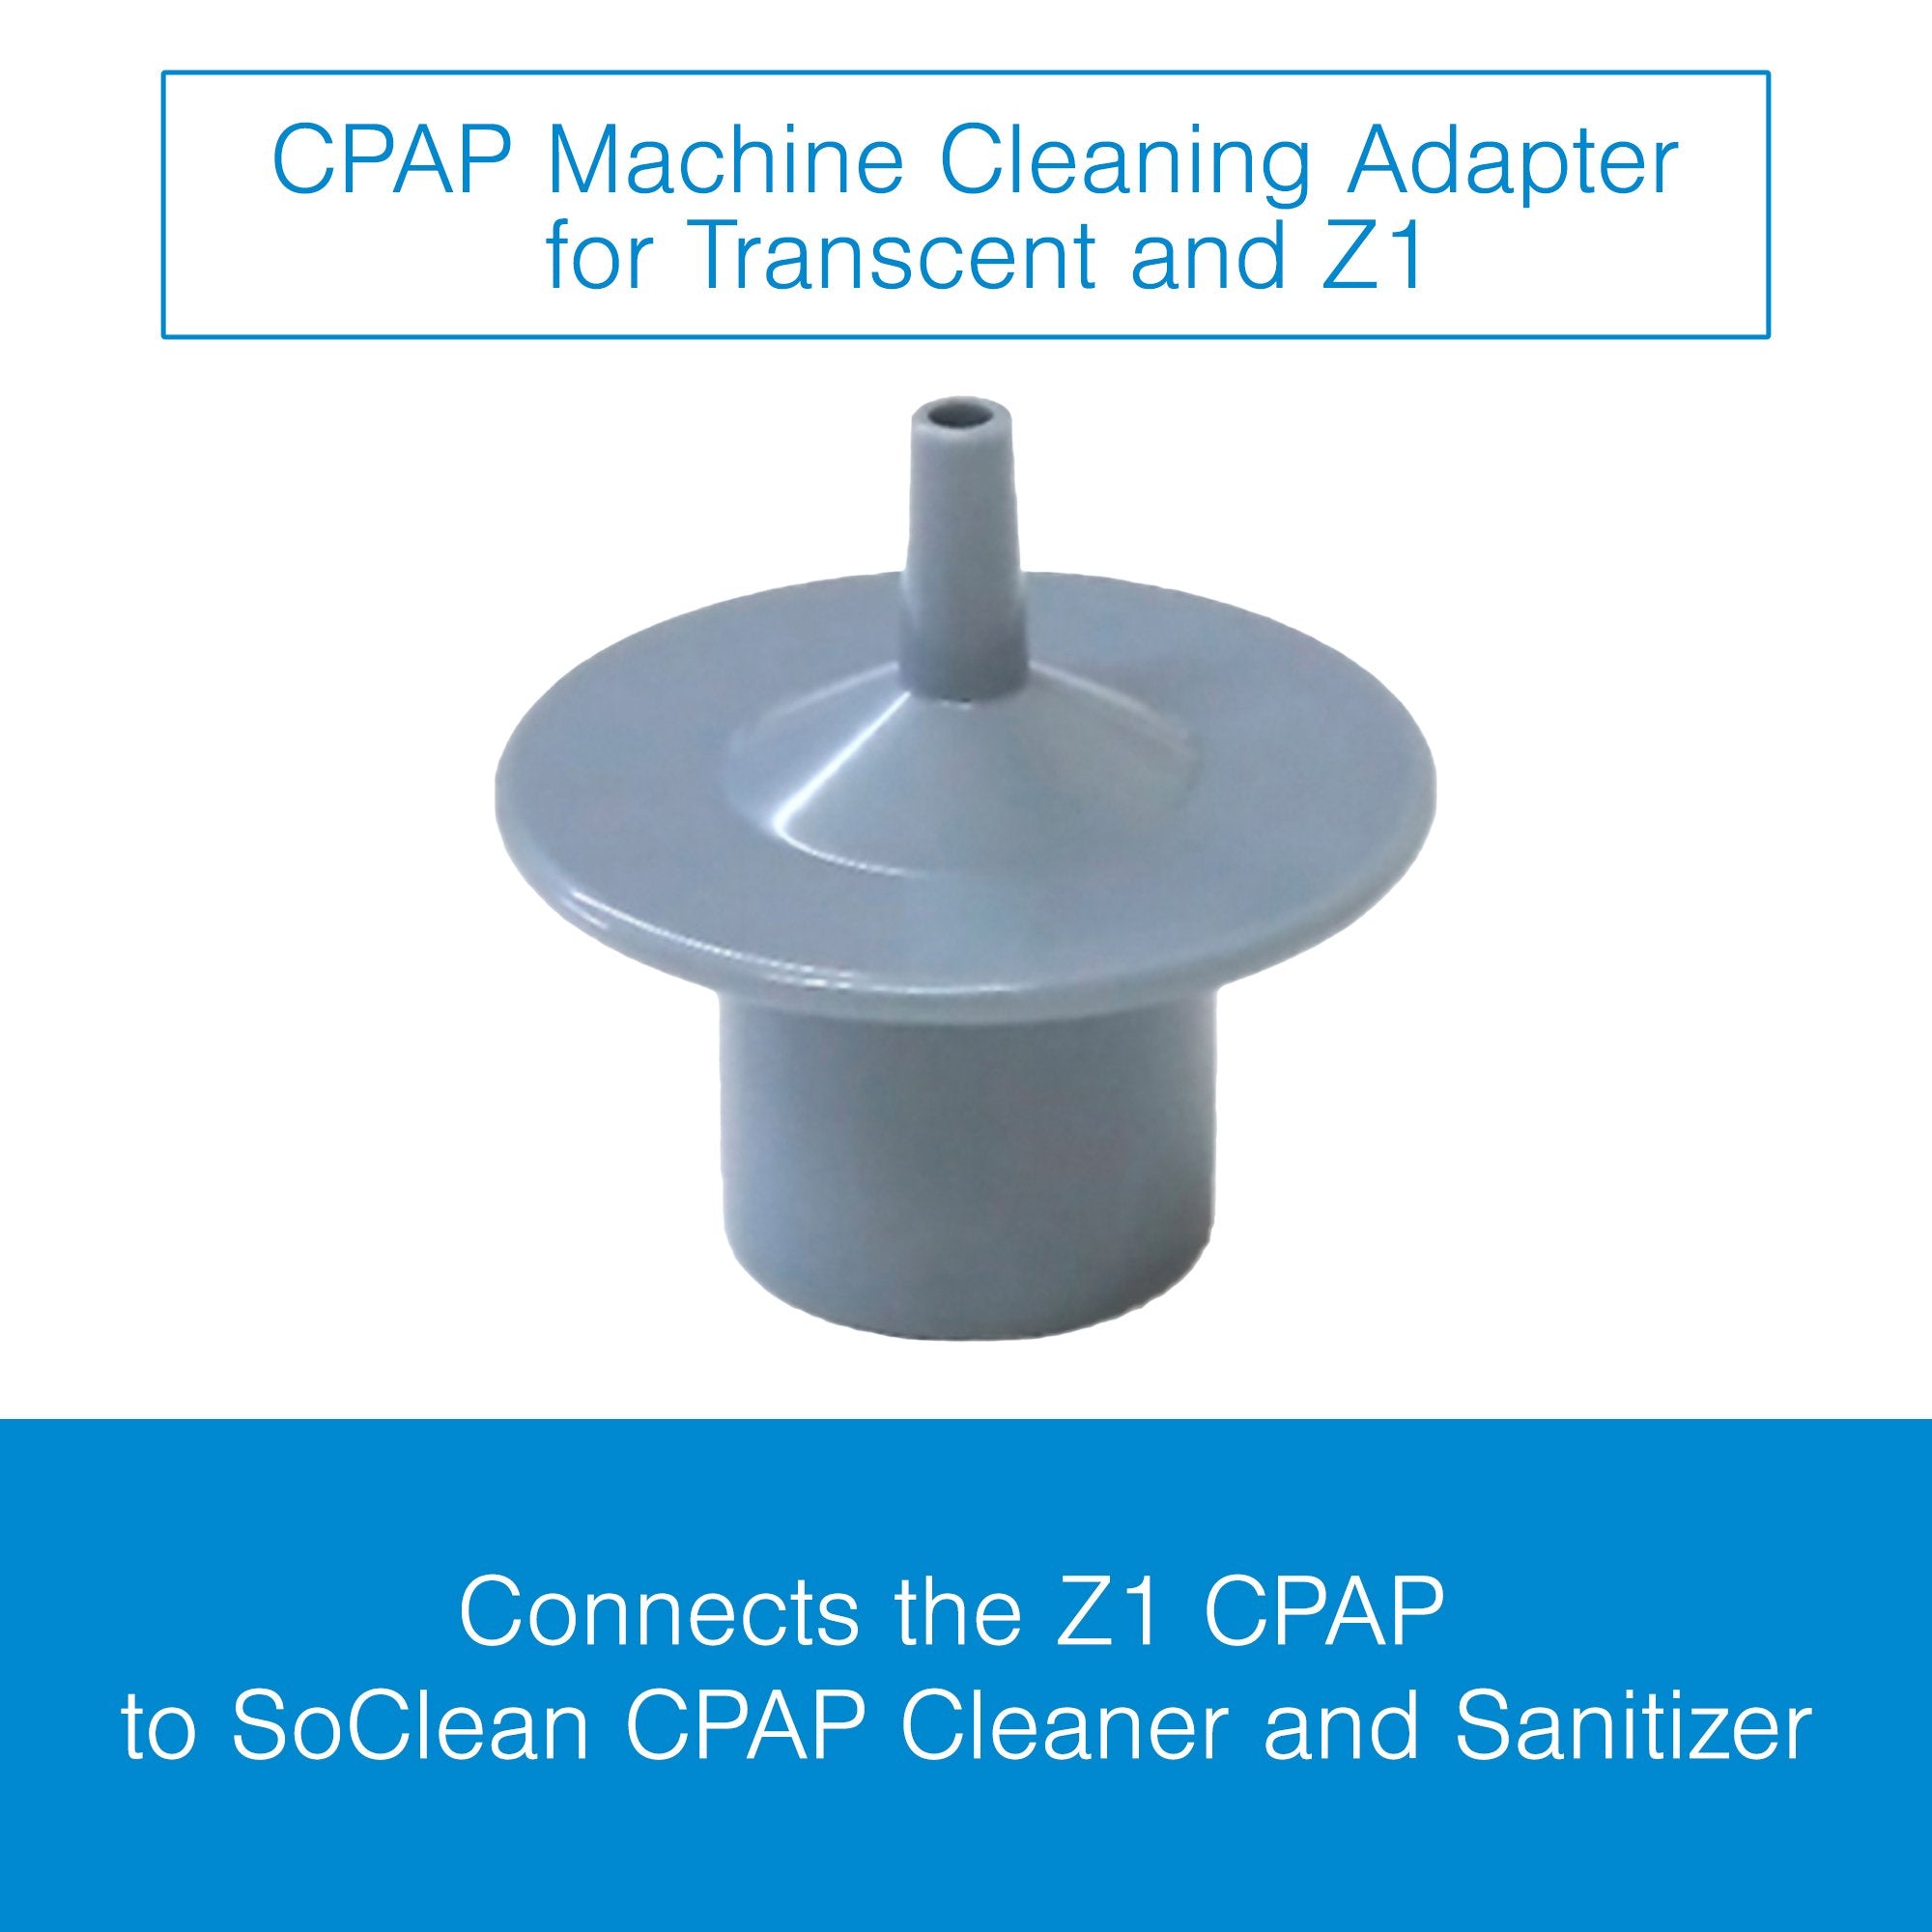 CPAP Cleaning Machine Adapter SoClean For Transcend and Z1 CPAP Machines